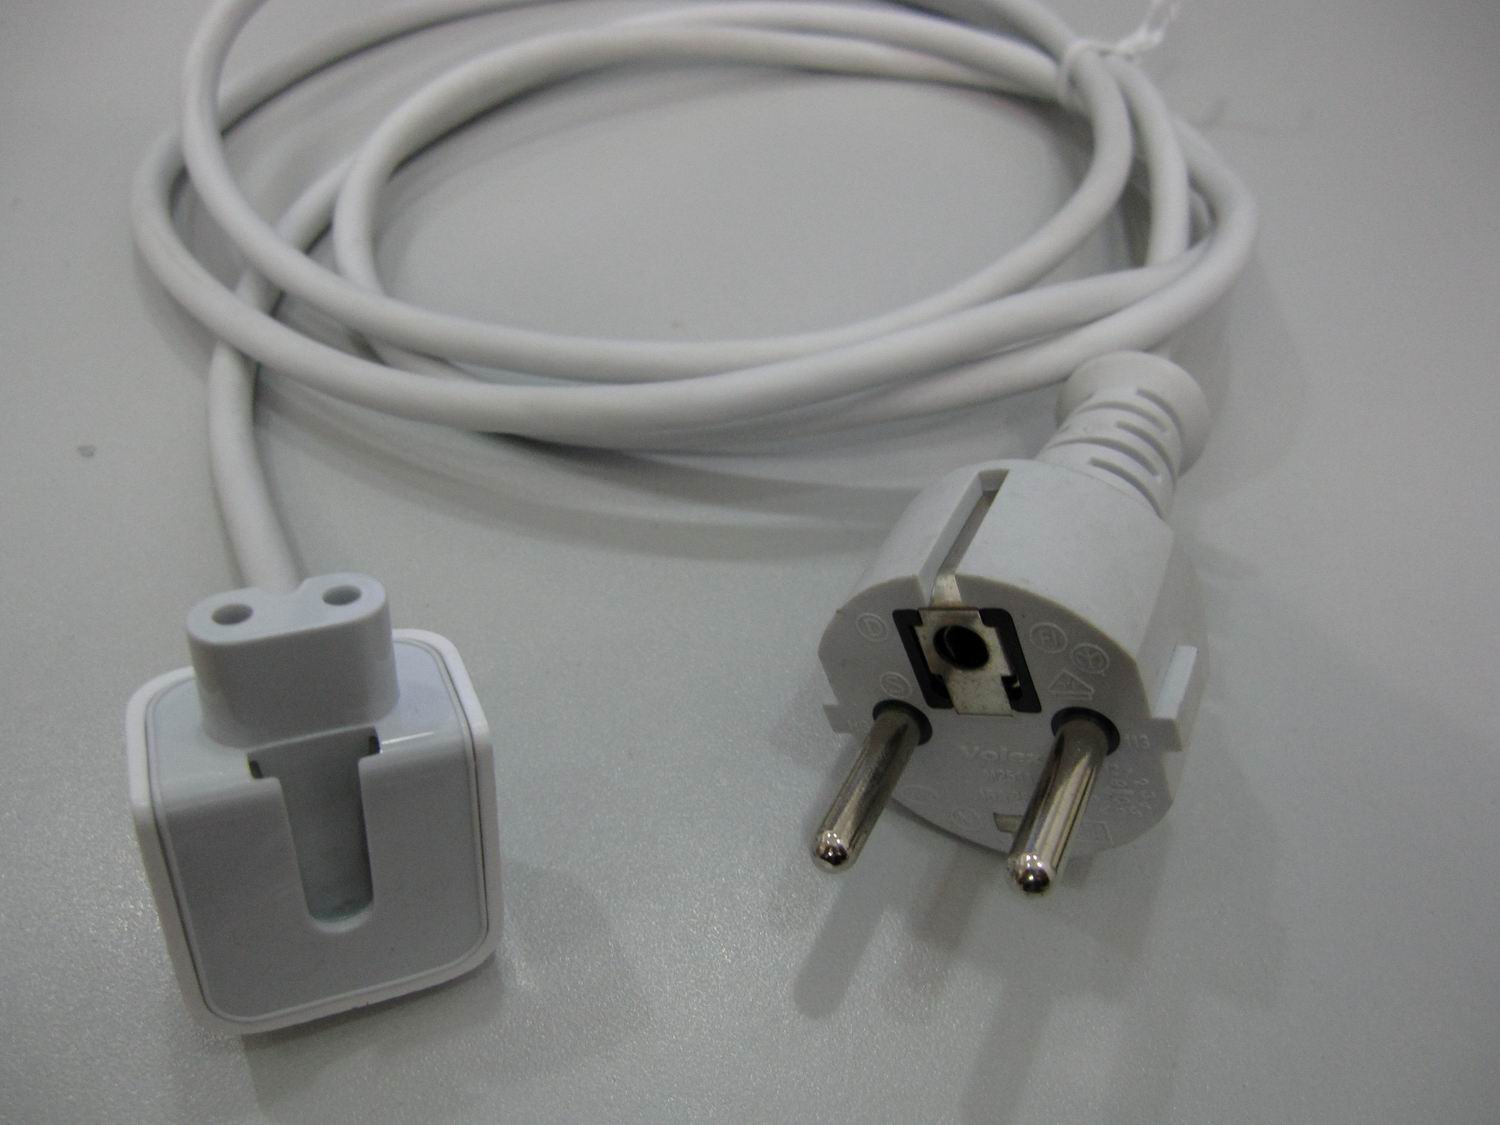 Power Cable For Apple Adapter - Used for EU